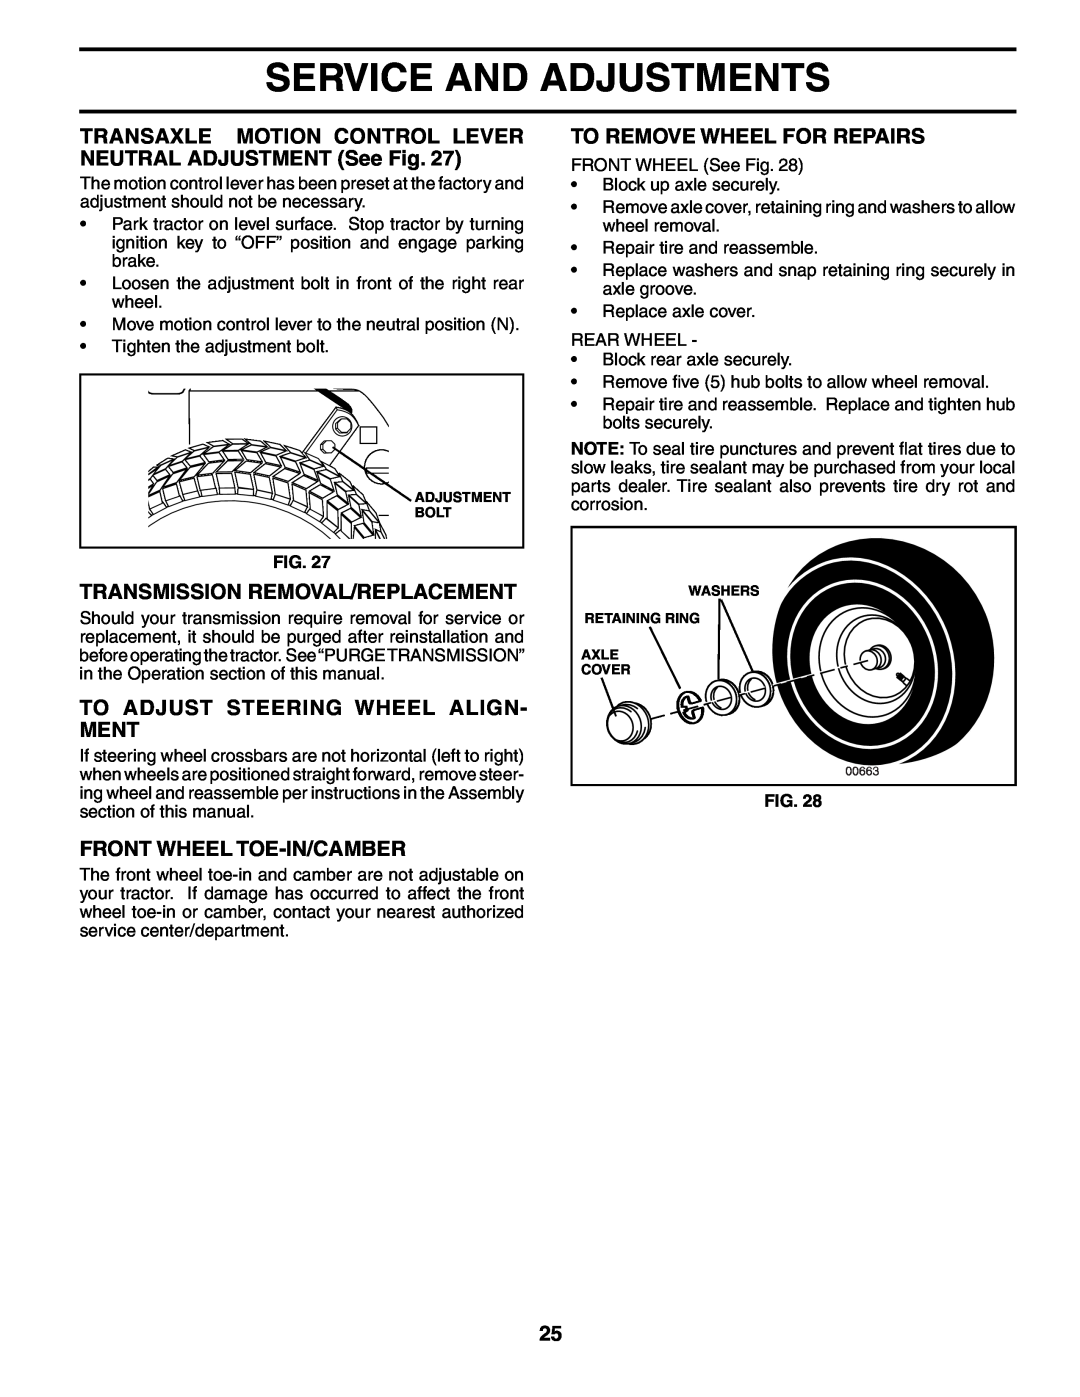 Husqvarna GTH2548XP Transmission Removal/Replacement, To Adjust Steering Wheel Align- Ment, Front Wheel Toe-In/Camber 